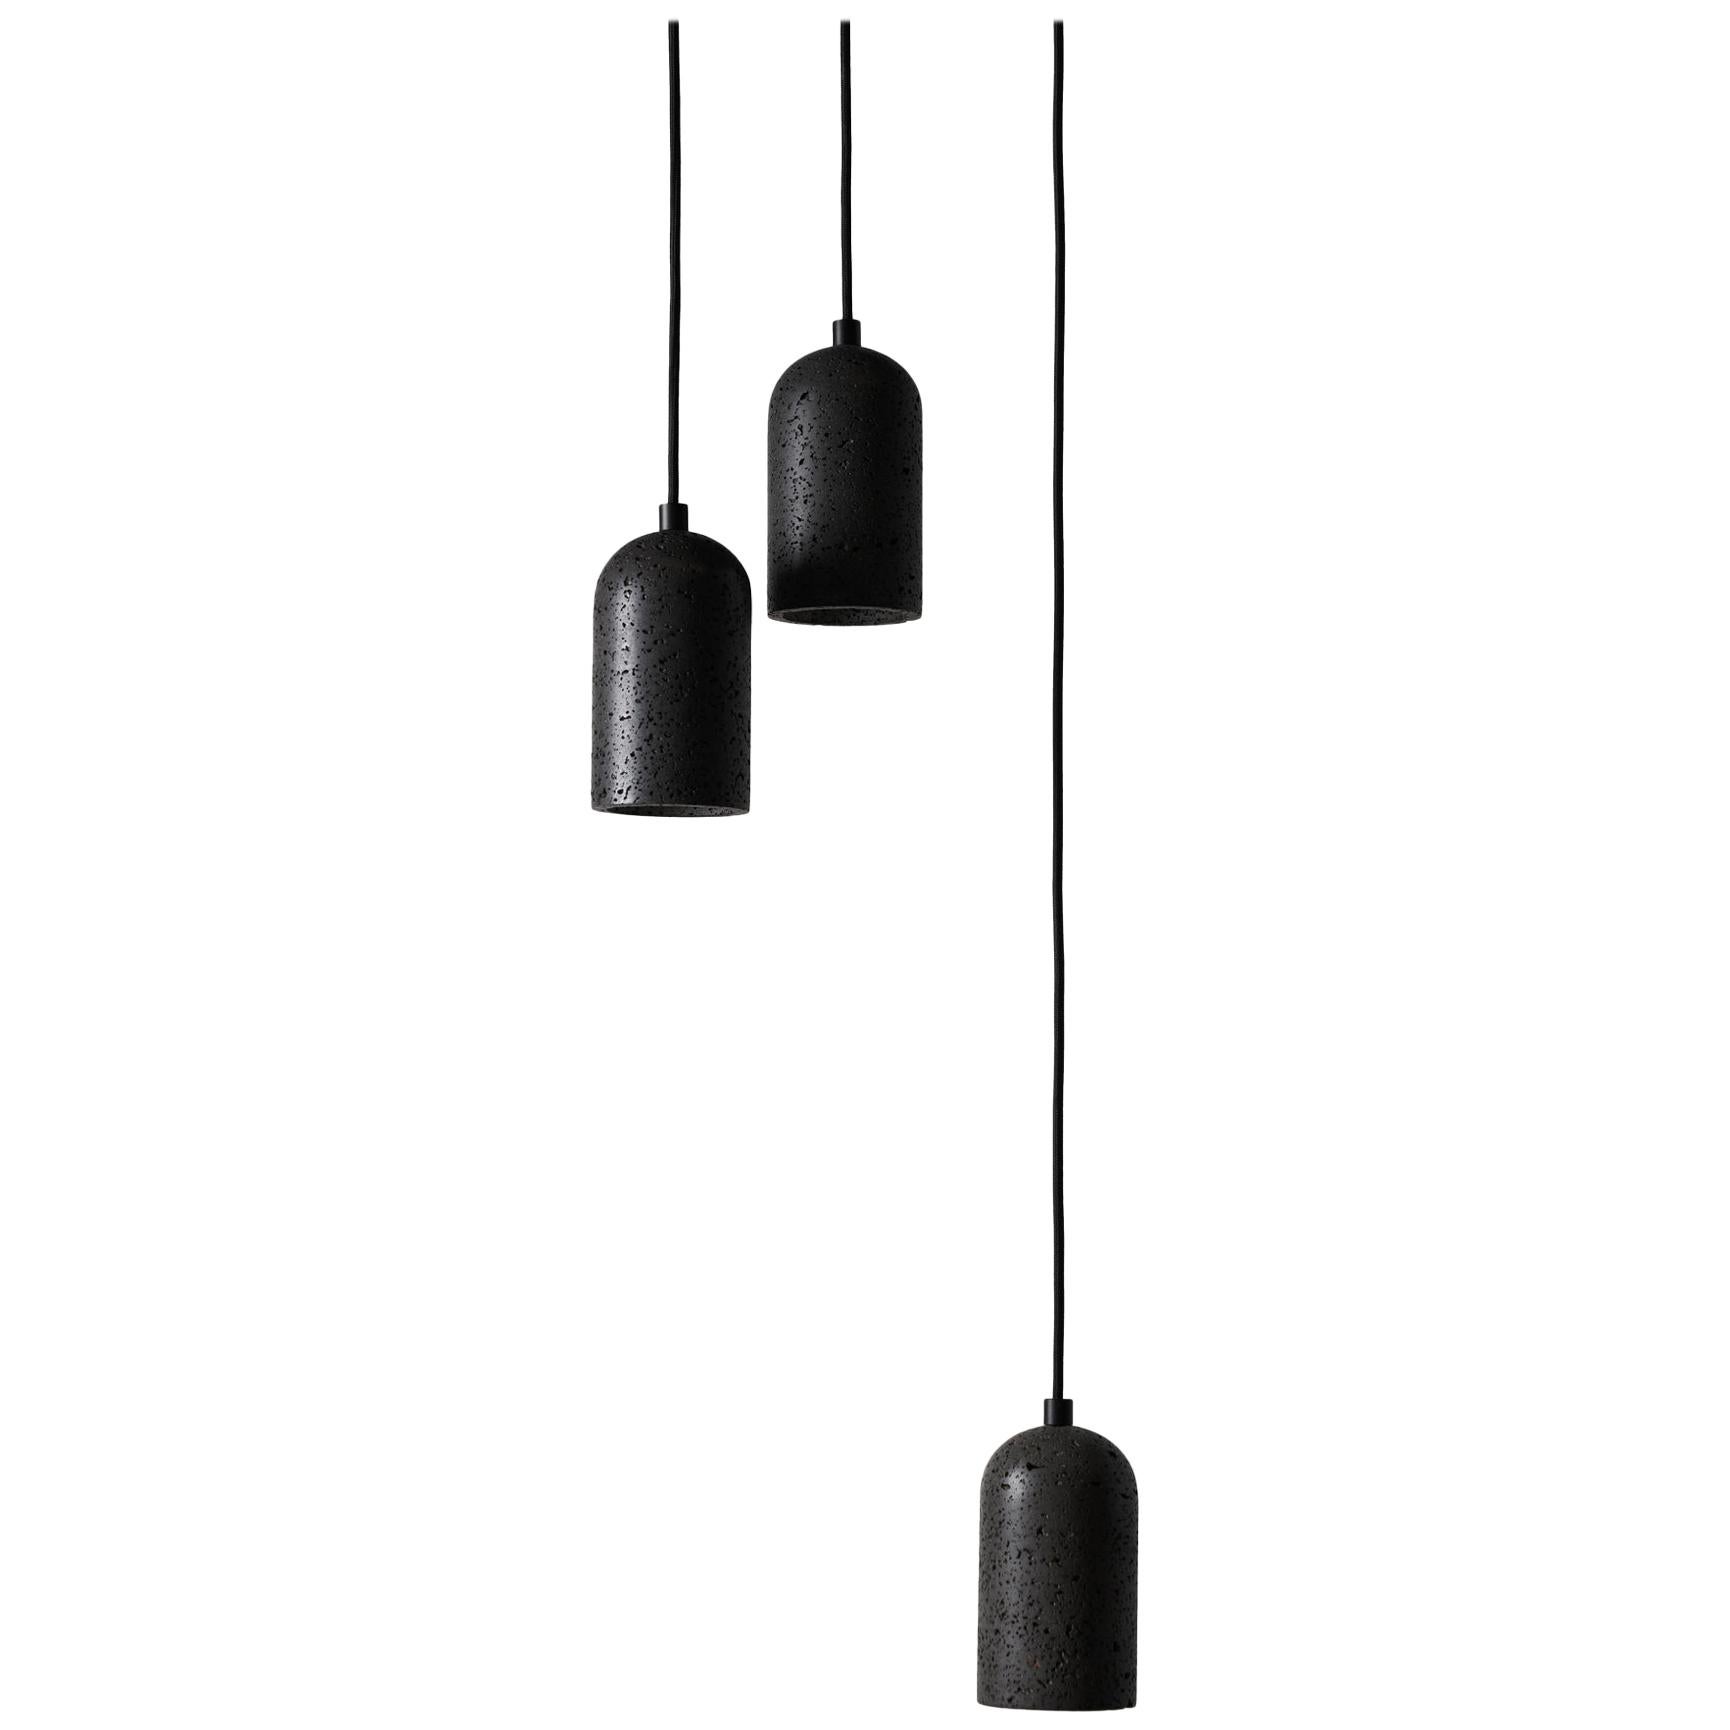 Pendant lamps 'U' by Buzao x Bentu design.
After concrete version, let's meet the black lava stone and white marble versions!

(Sold individually)

18 cm high, 9.6 cm diameter
Wire: 2 Meters Black (adjustable) 

Brass (gold) or aluminum (black)